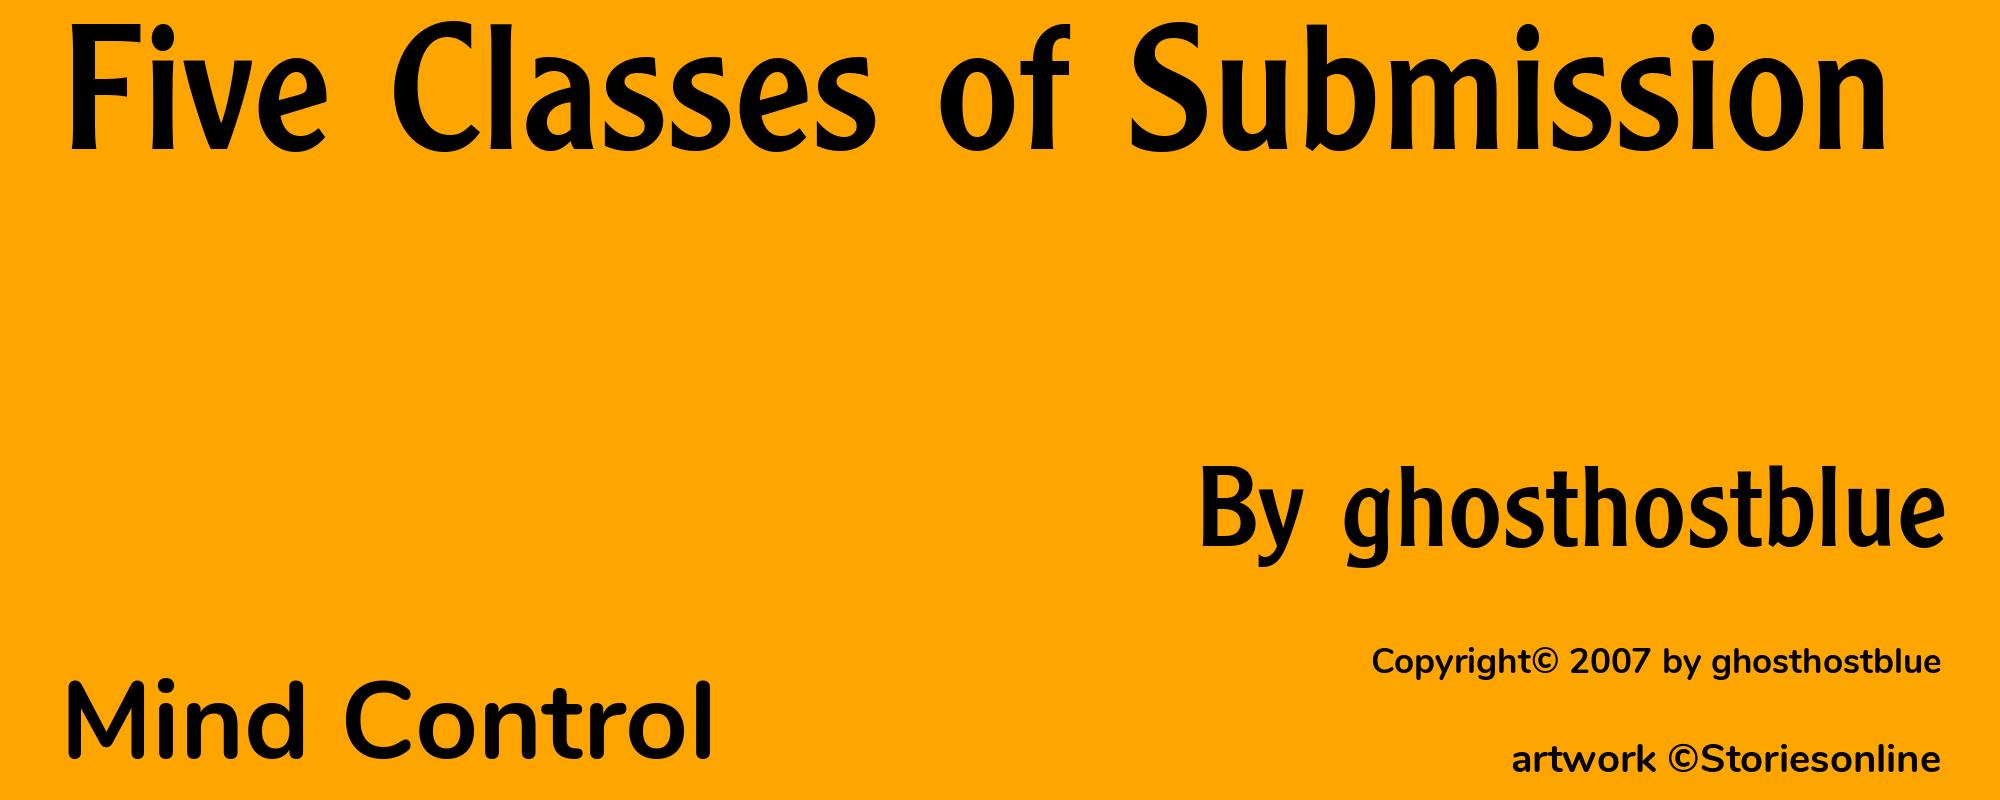 Five Classes of Submission - Cover